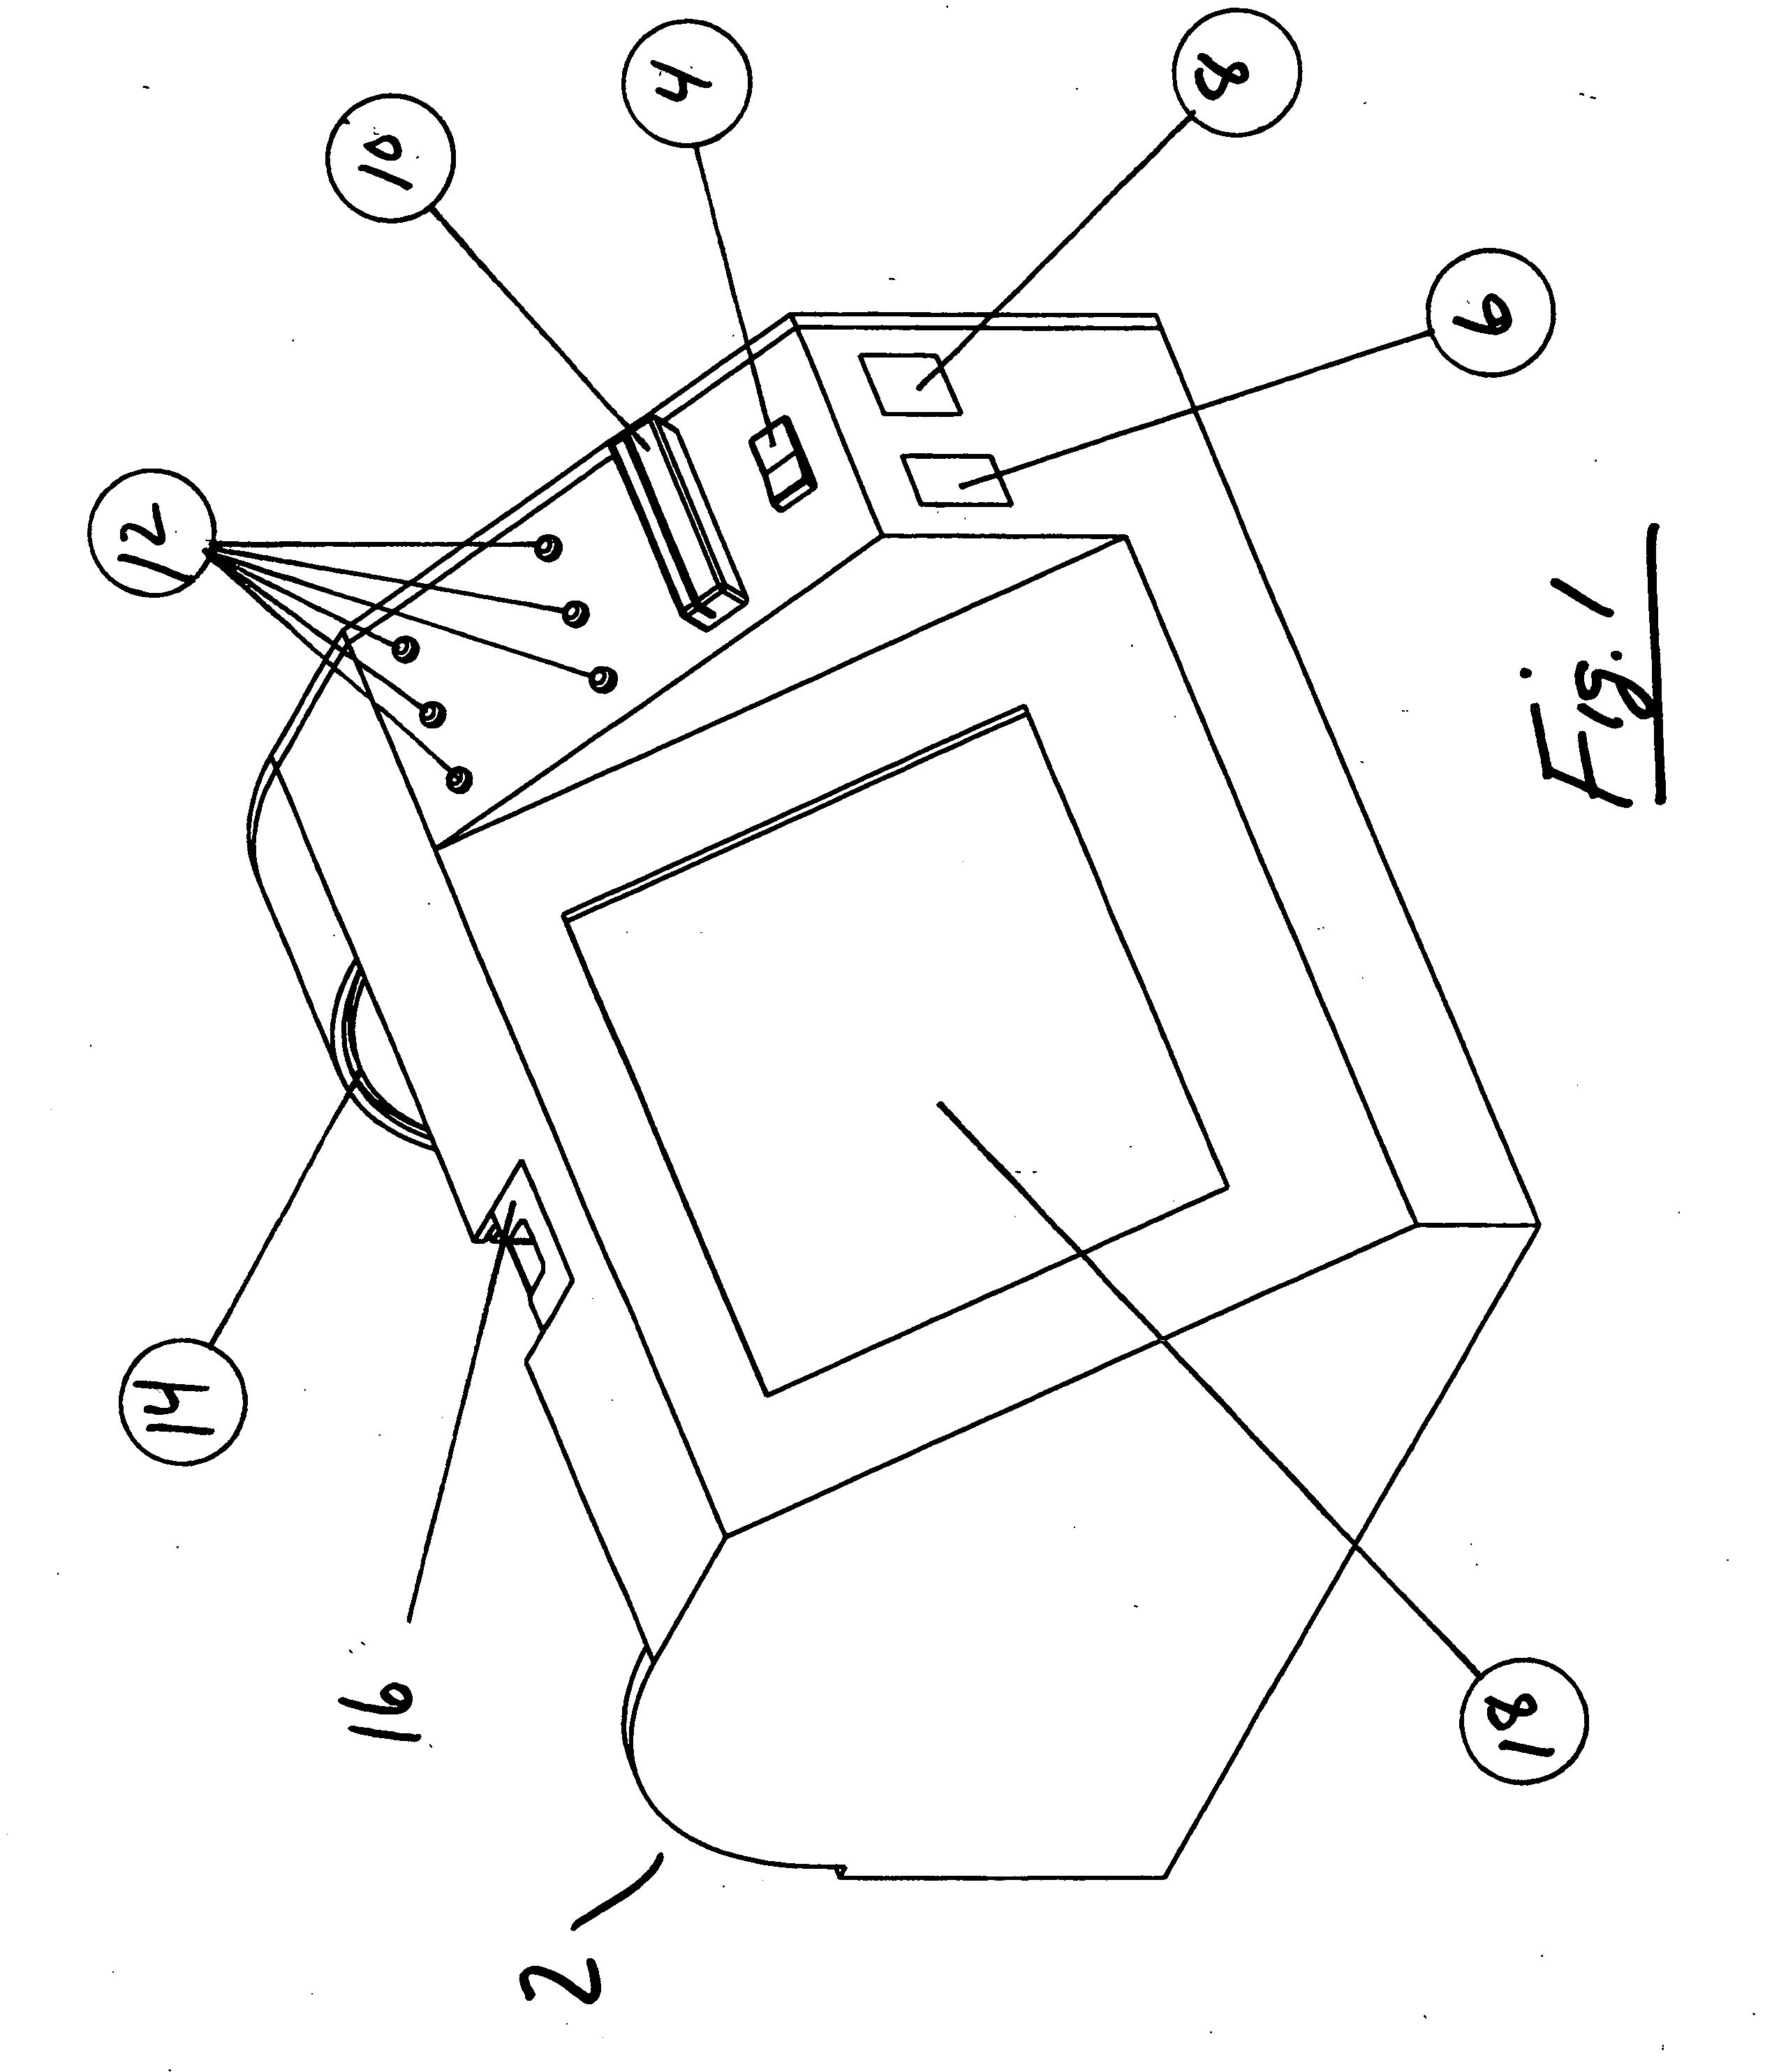 Apparatus for coating medical devices